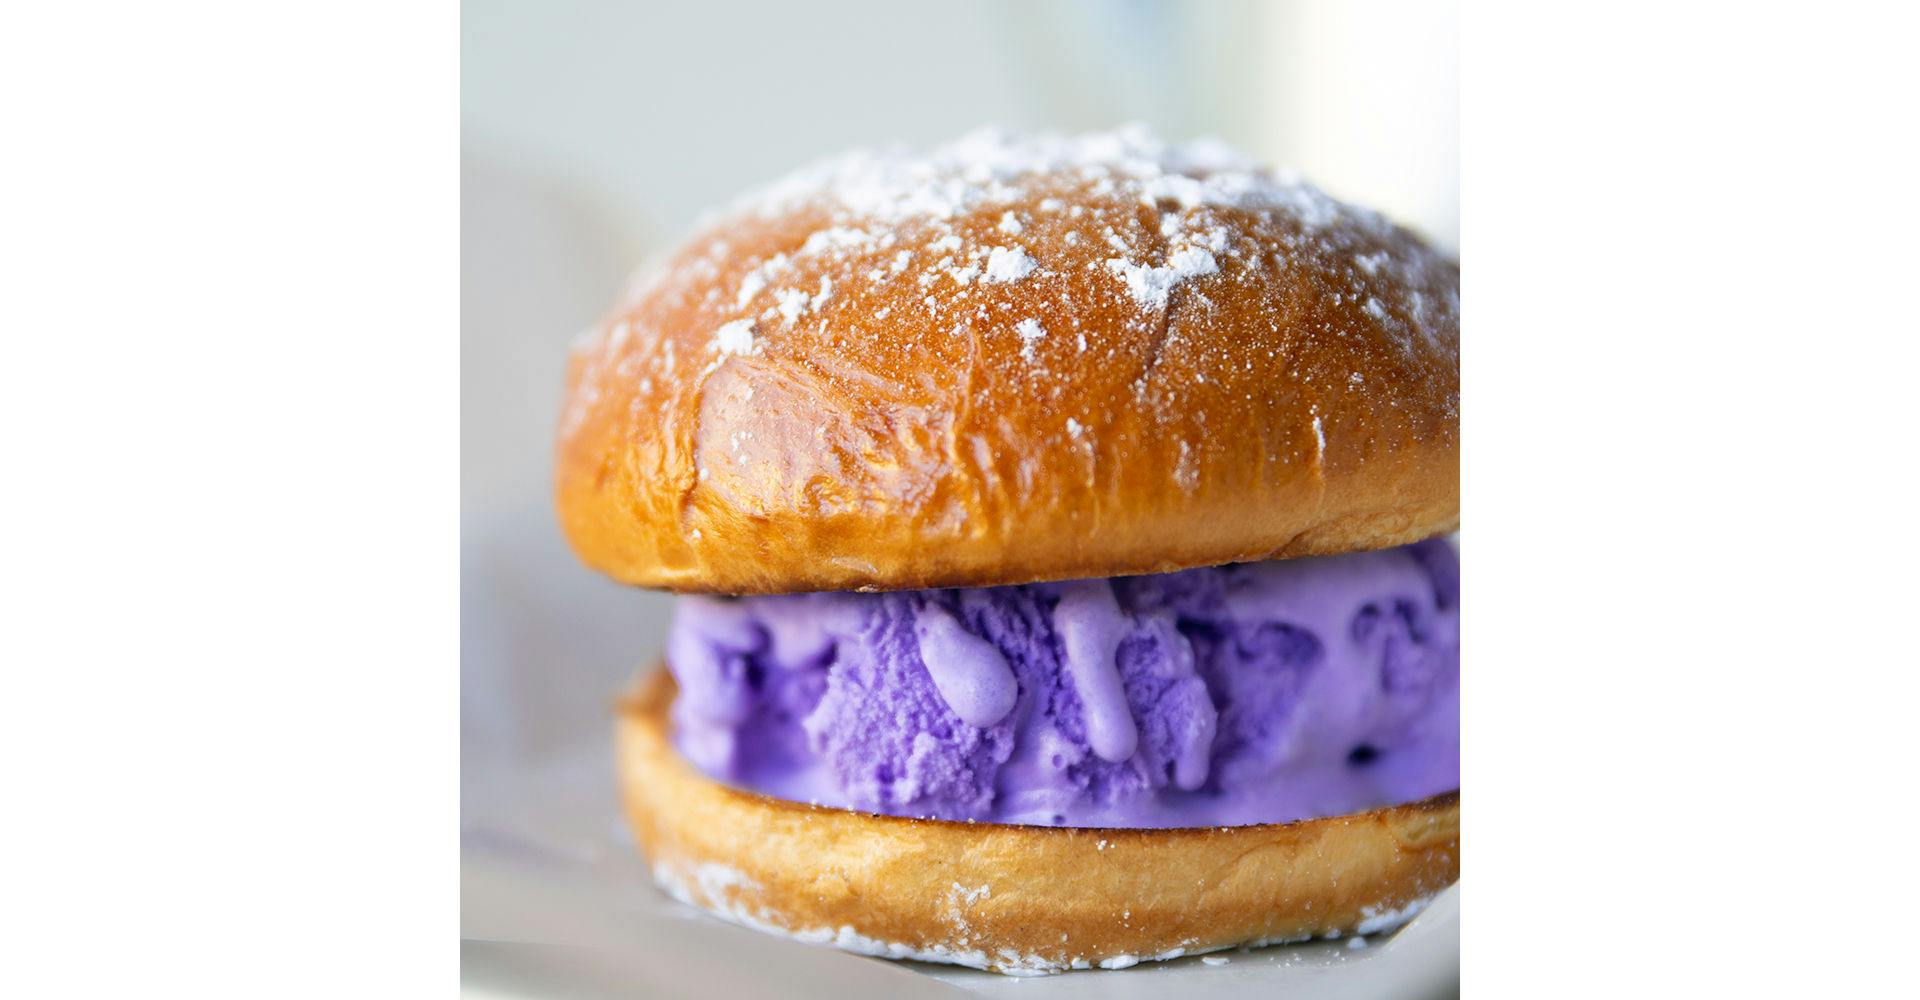 Ube Ice Cream Sandwich from Bites Restaurant in Forest Grove, OR